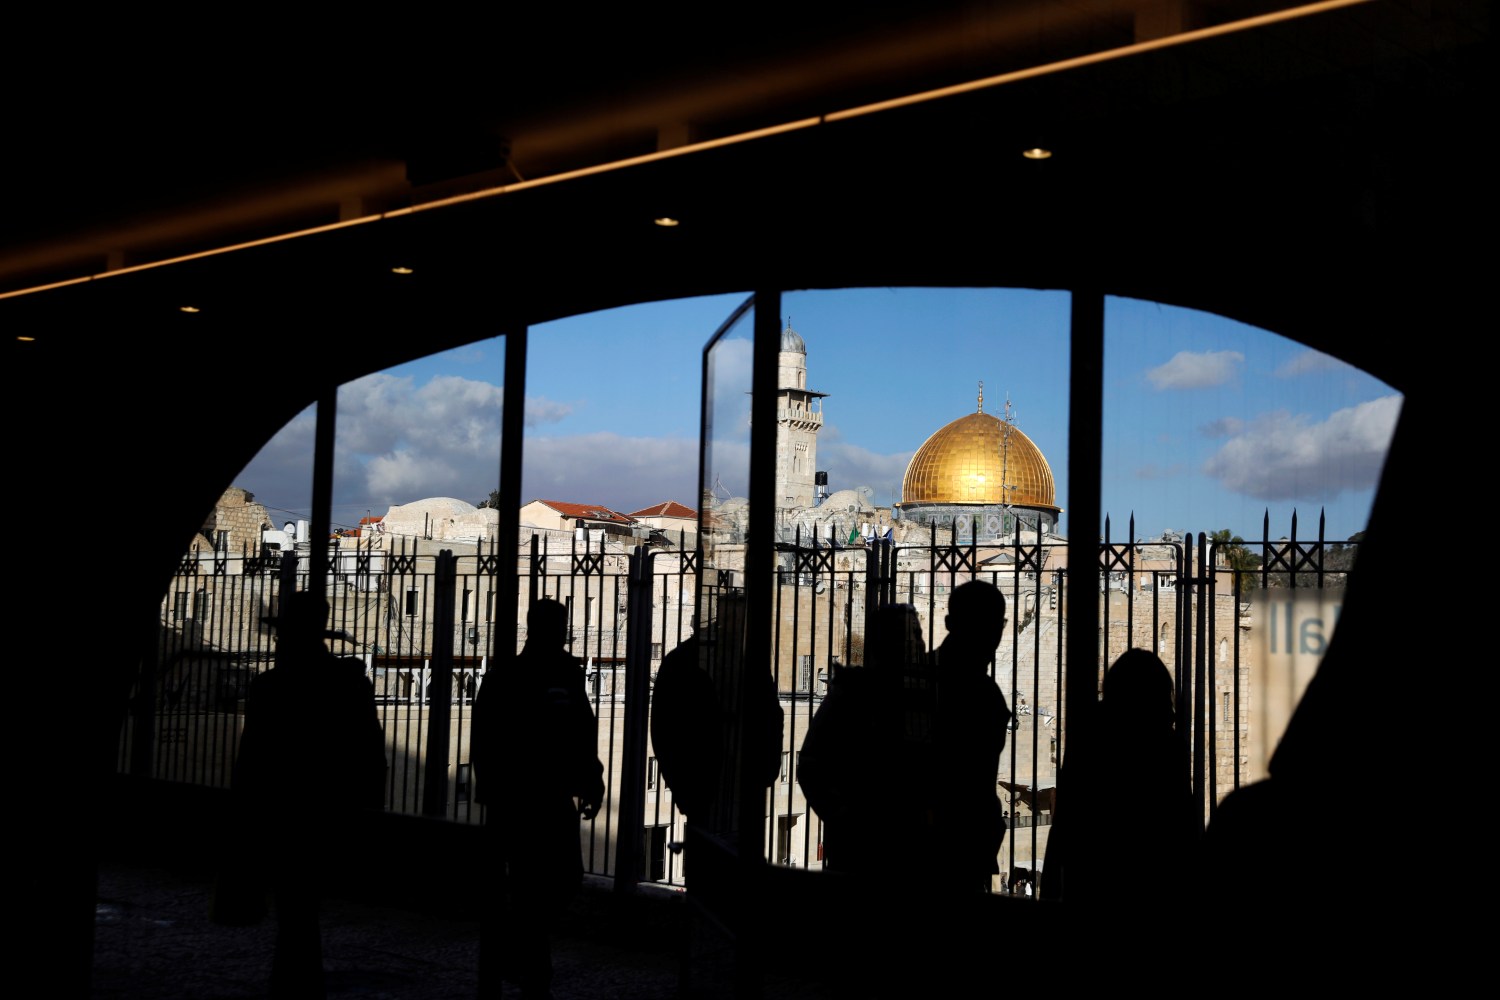 People look out from a building facing the Dome of the Rock (R), located in Jerusalem's Old City on the compound known to Muslims as Noble Sanctuary and to Jews as Temple Mount December 7, 2017. REUTERS/Ronen Zvulun - RC18733A13D0